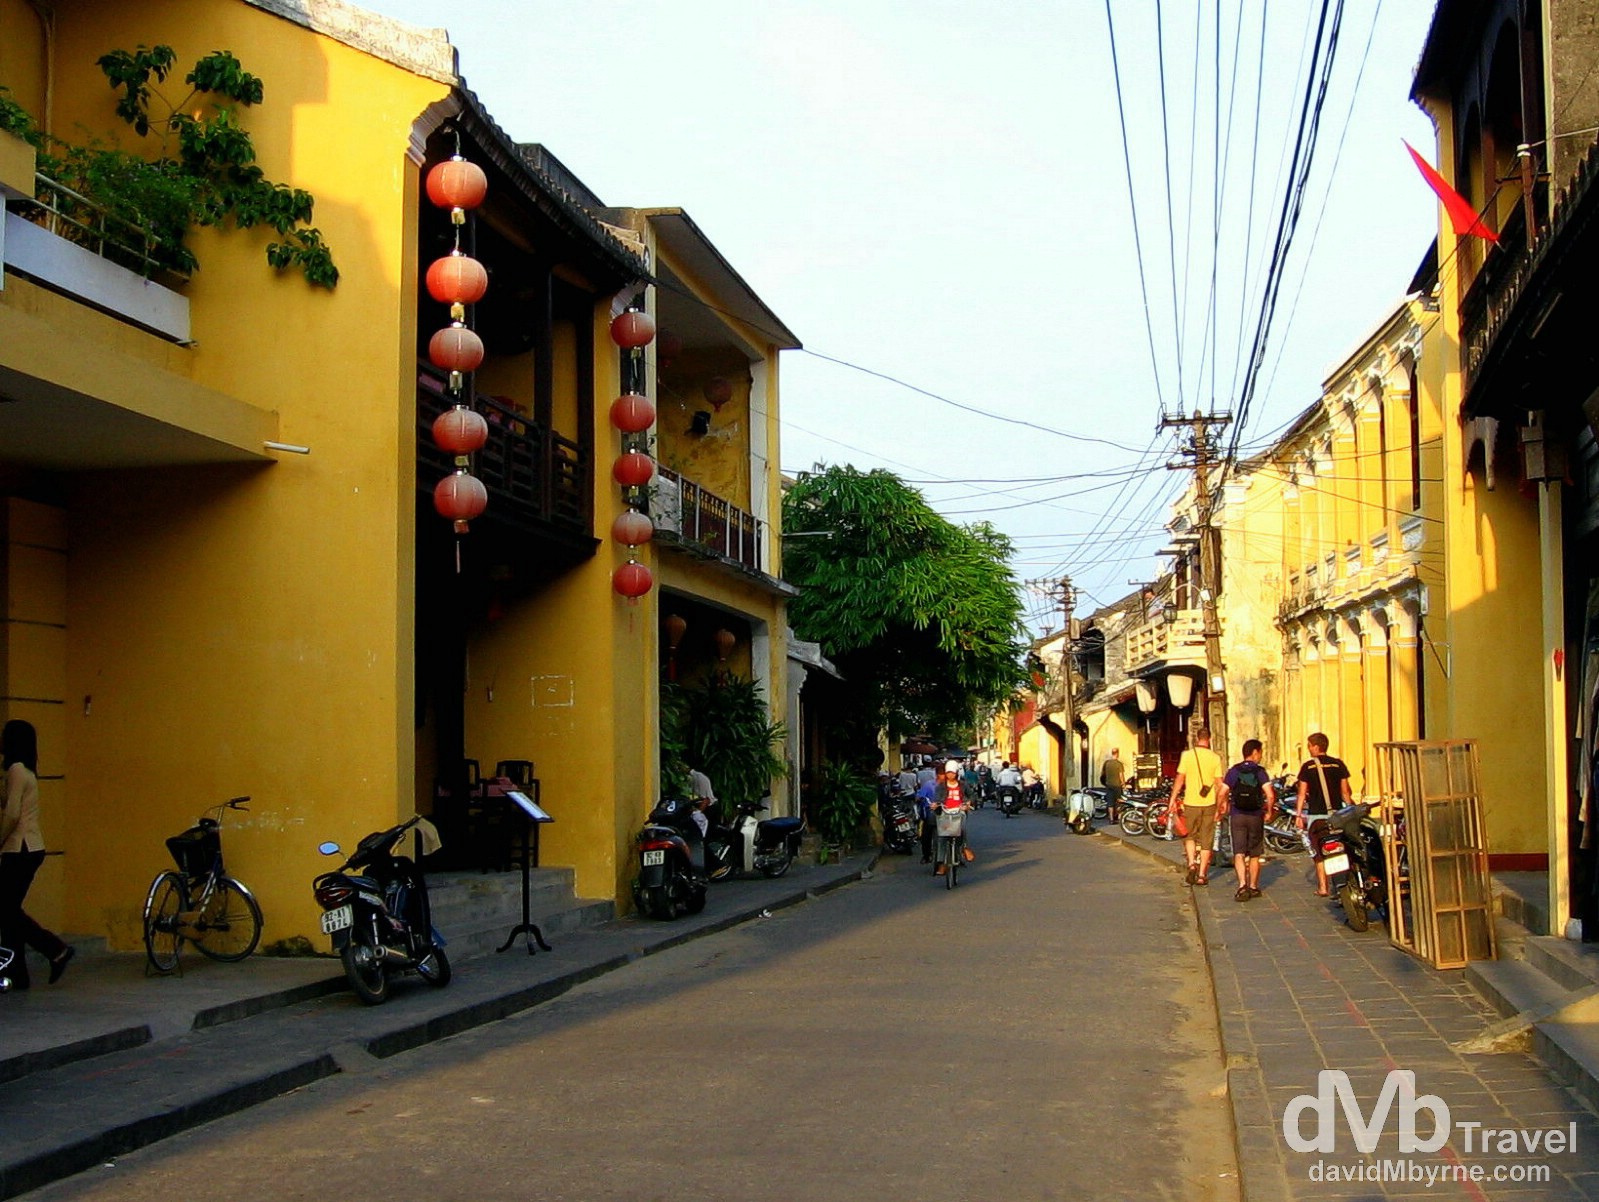 On the streets of the yellow streets of the UNESCO-listed Hoi An Ancient Town in central Vietnam. September 11th, 2005. 